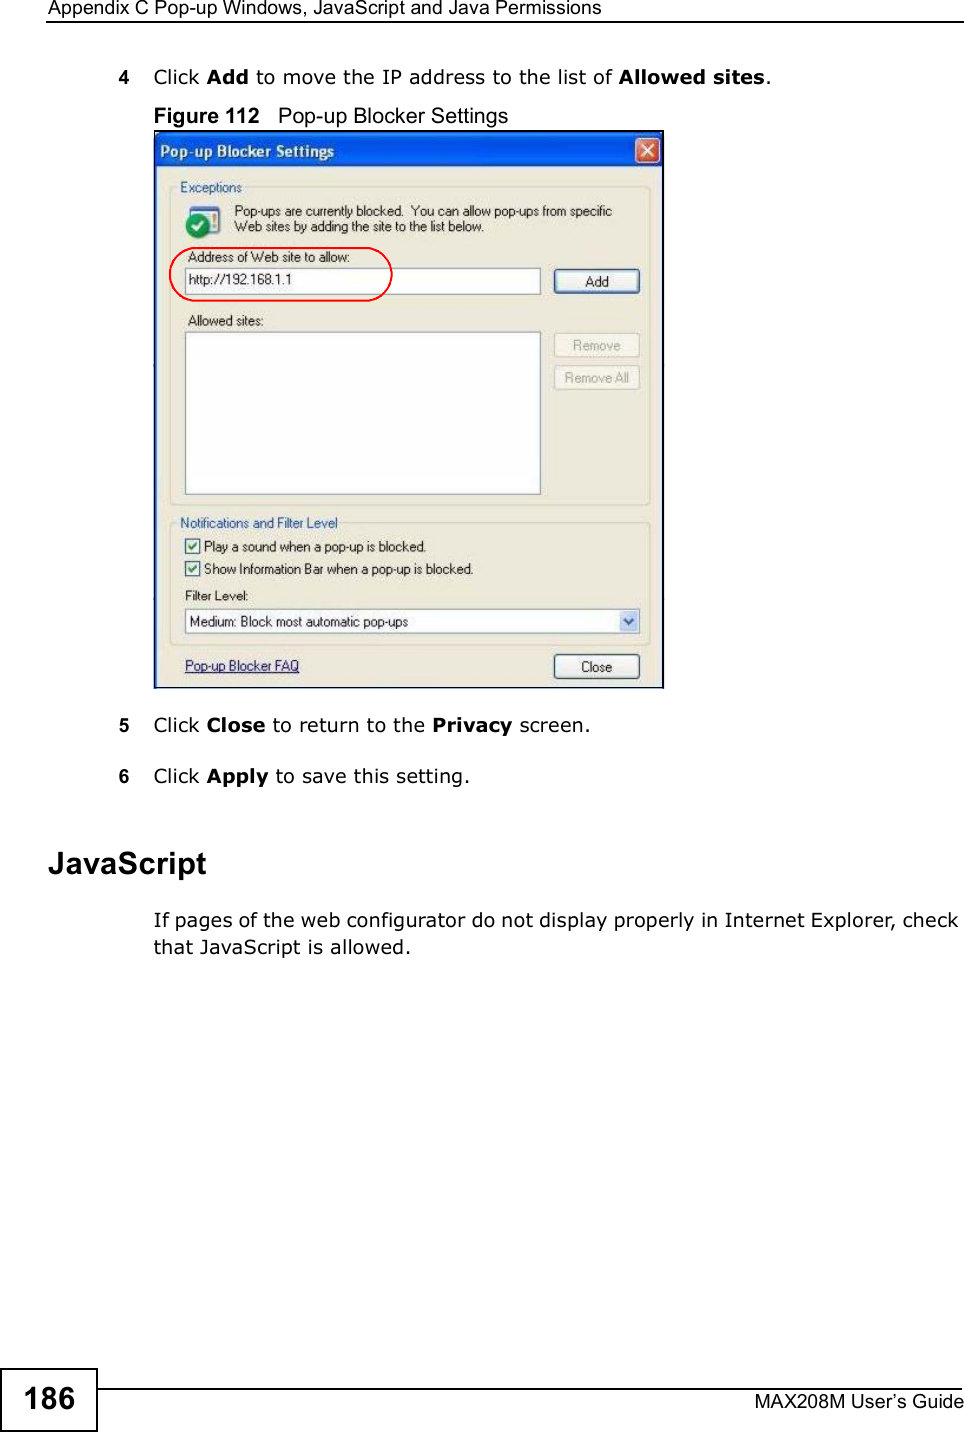 Appendix CPop-up Windows, JavaScript and Java PermissionsMAX208M User s Guide1864Click Add to move the IP address to the list of Allowed sites.Figure 112   Pop-up Blocker Settings5Click Close to return to the Privacy screen. 6Click Apply to save this setting. JavaScriptIf pages of the web configurator do not display properly in Internet Explorer, check that JavaScript is allowed. 